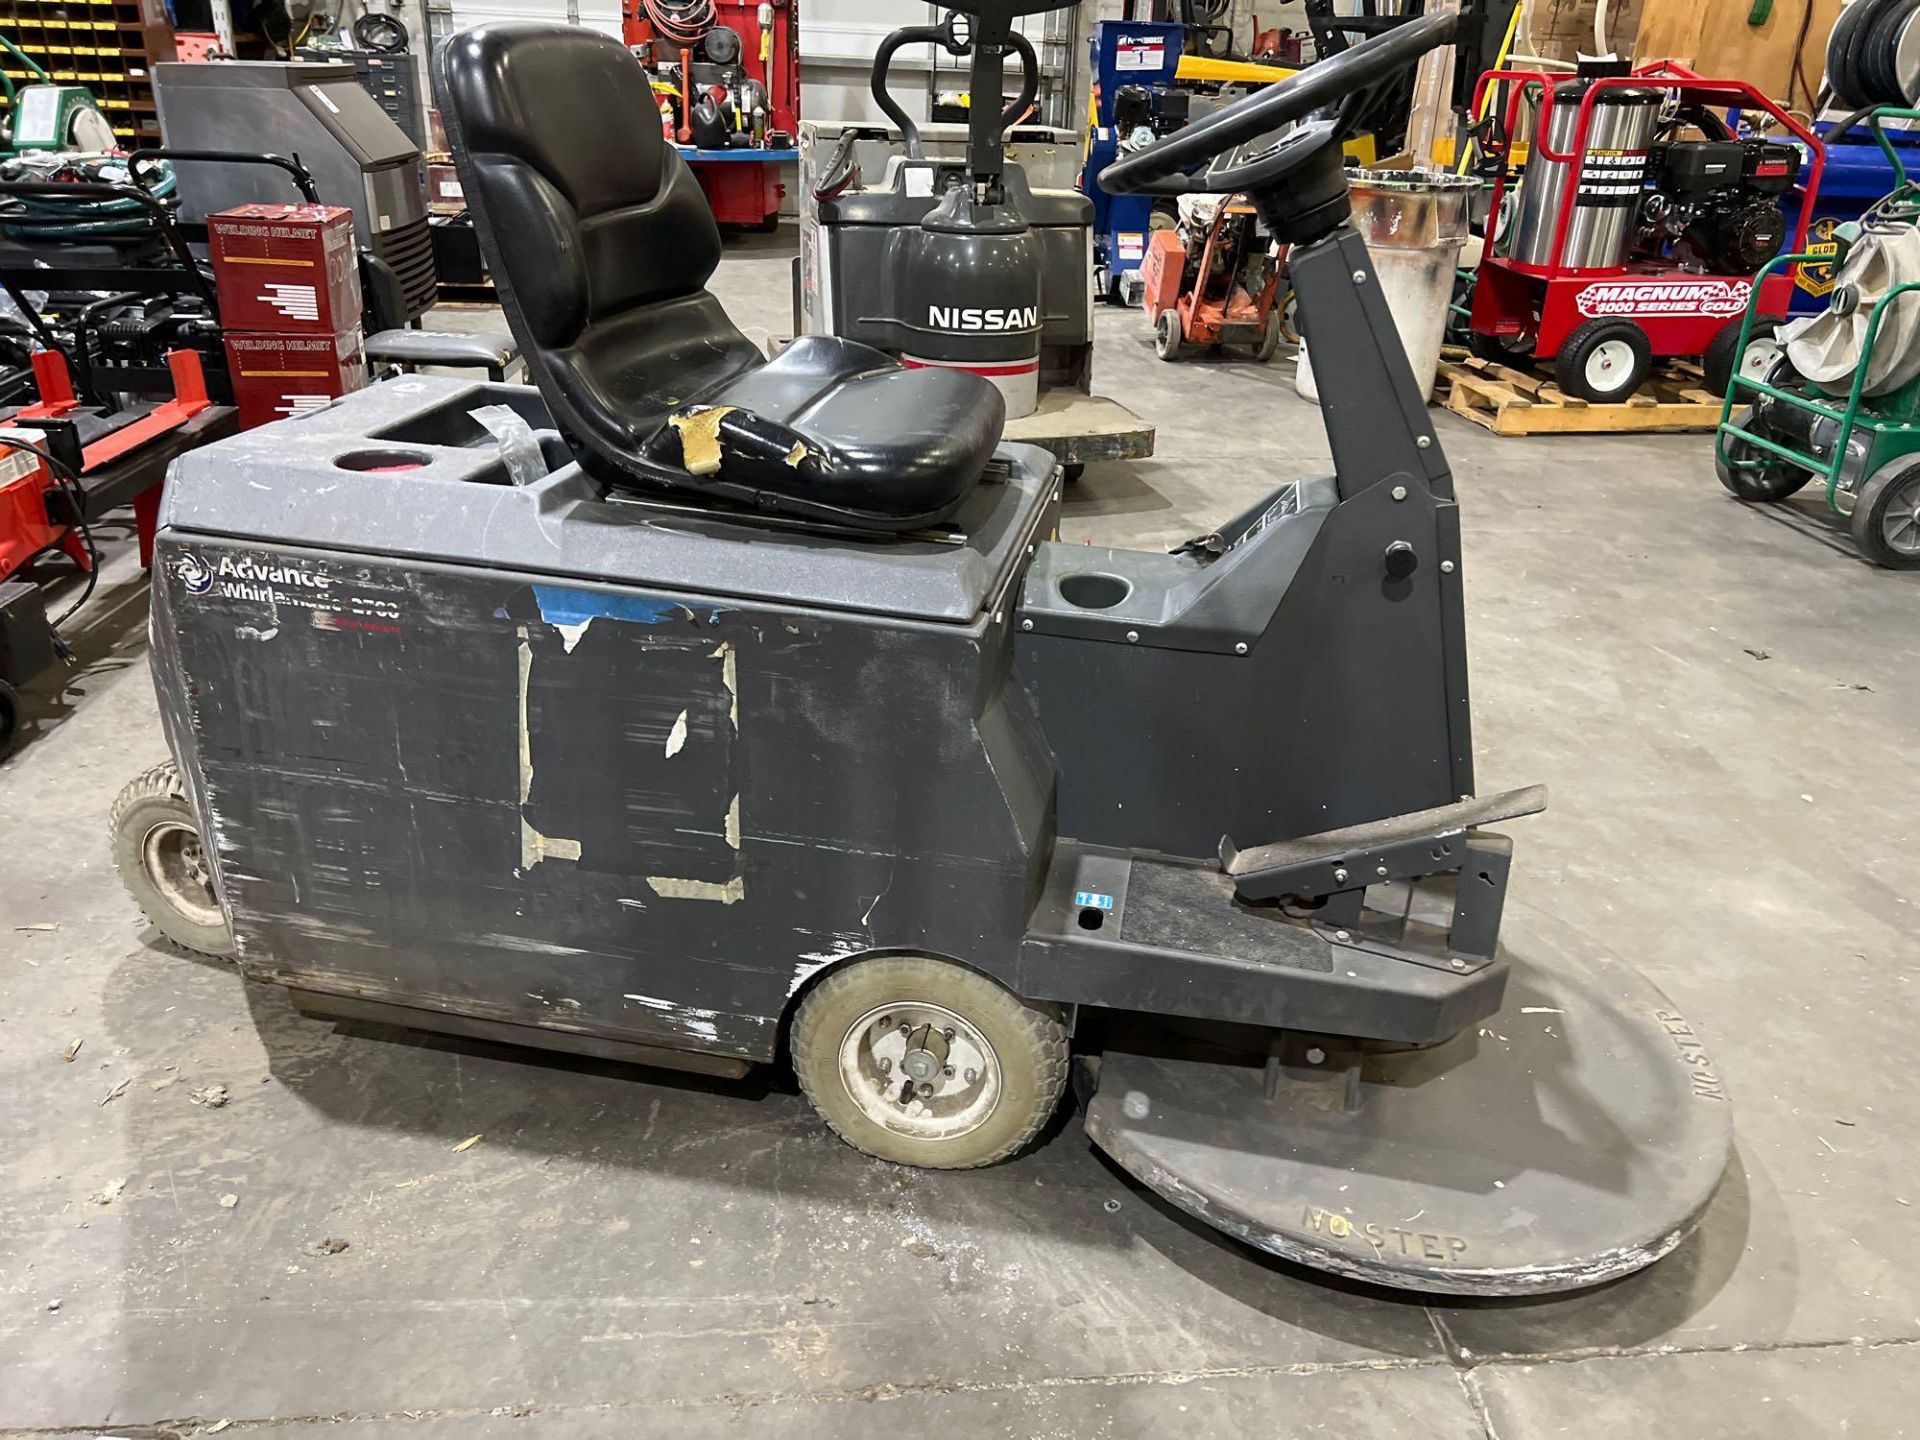 NILFISK ADVANCE WHIRLMATIC RIDE ON FLOOR BURNISHER MODEL 2700, NEEDS BRUSH, ELECTRIC, 36 VOLTS, RUNS - Image 4 of 9